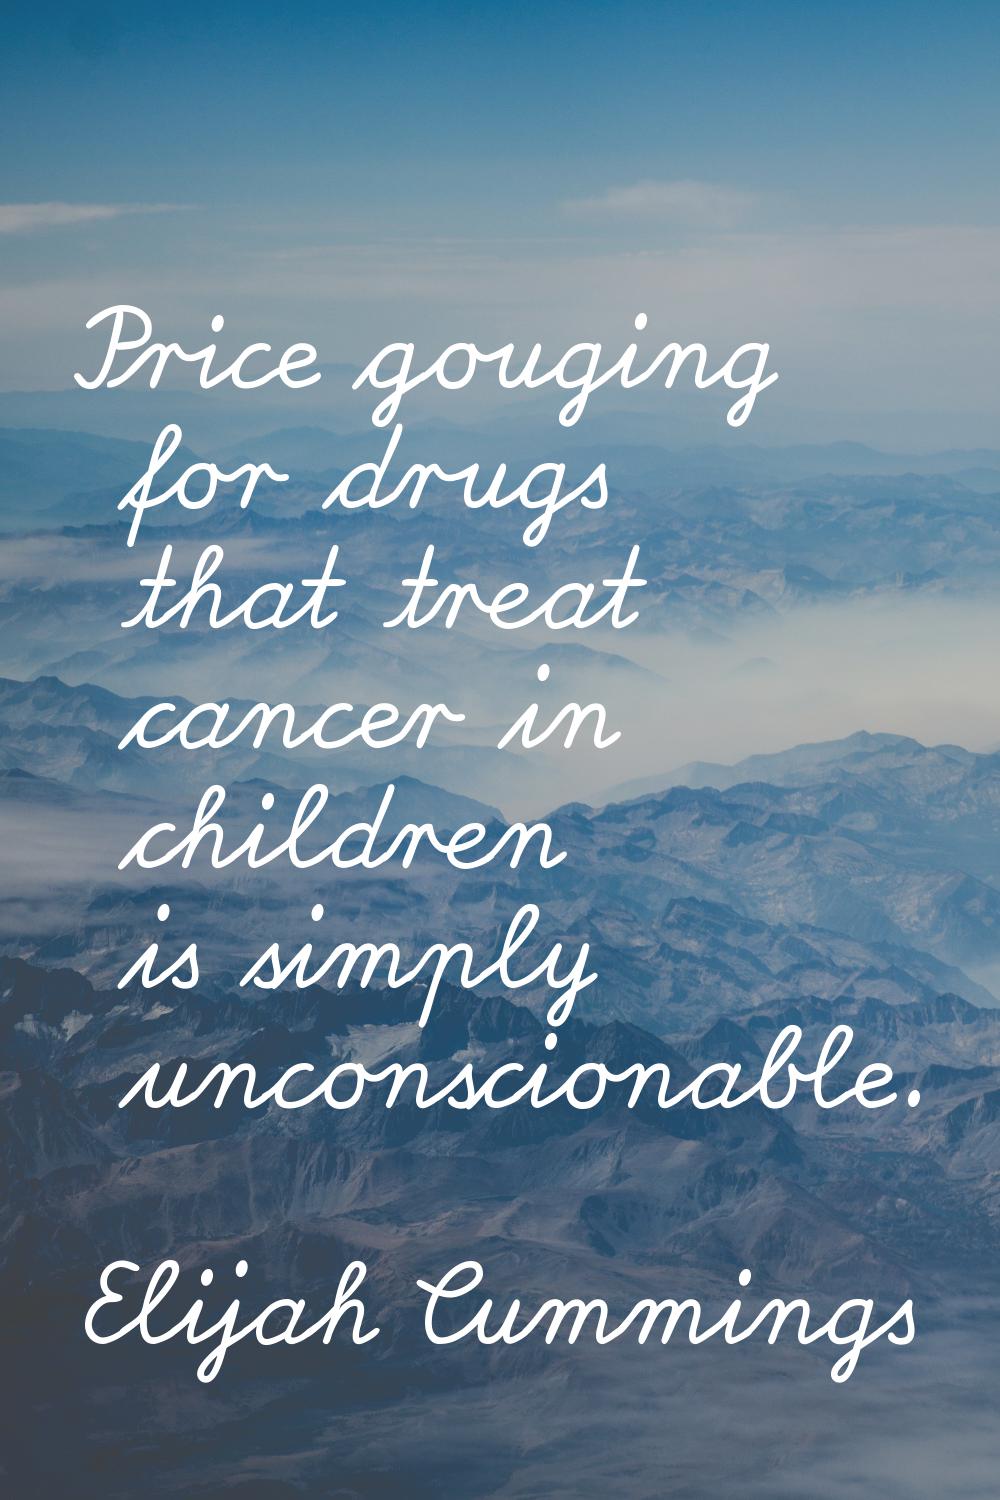 Price gouging for drugs that treat cancer in children is simply unconscionable.